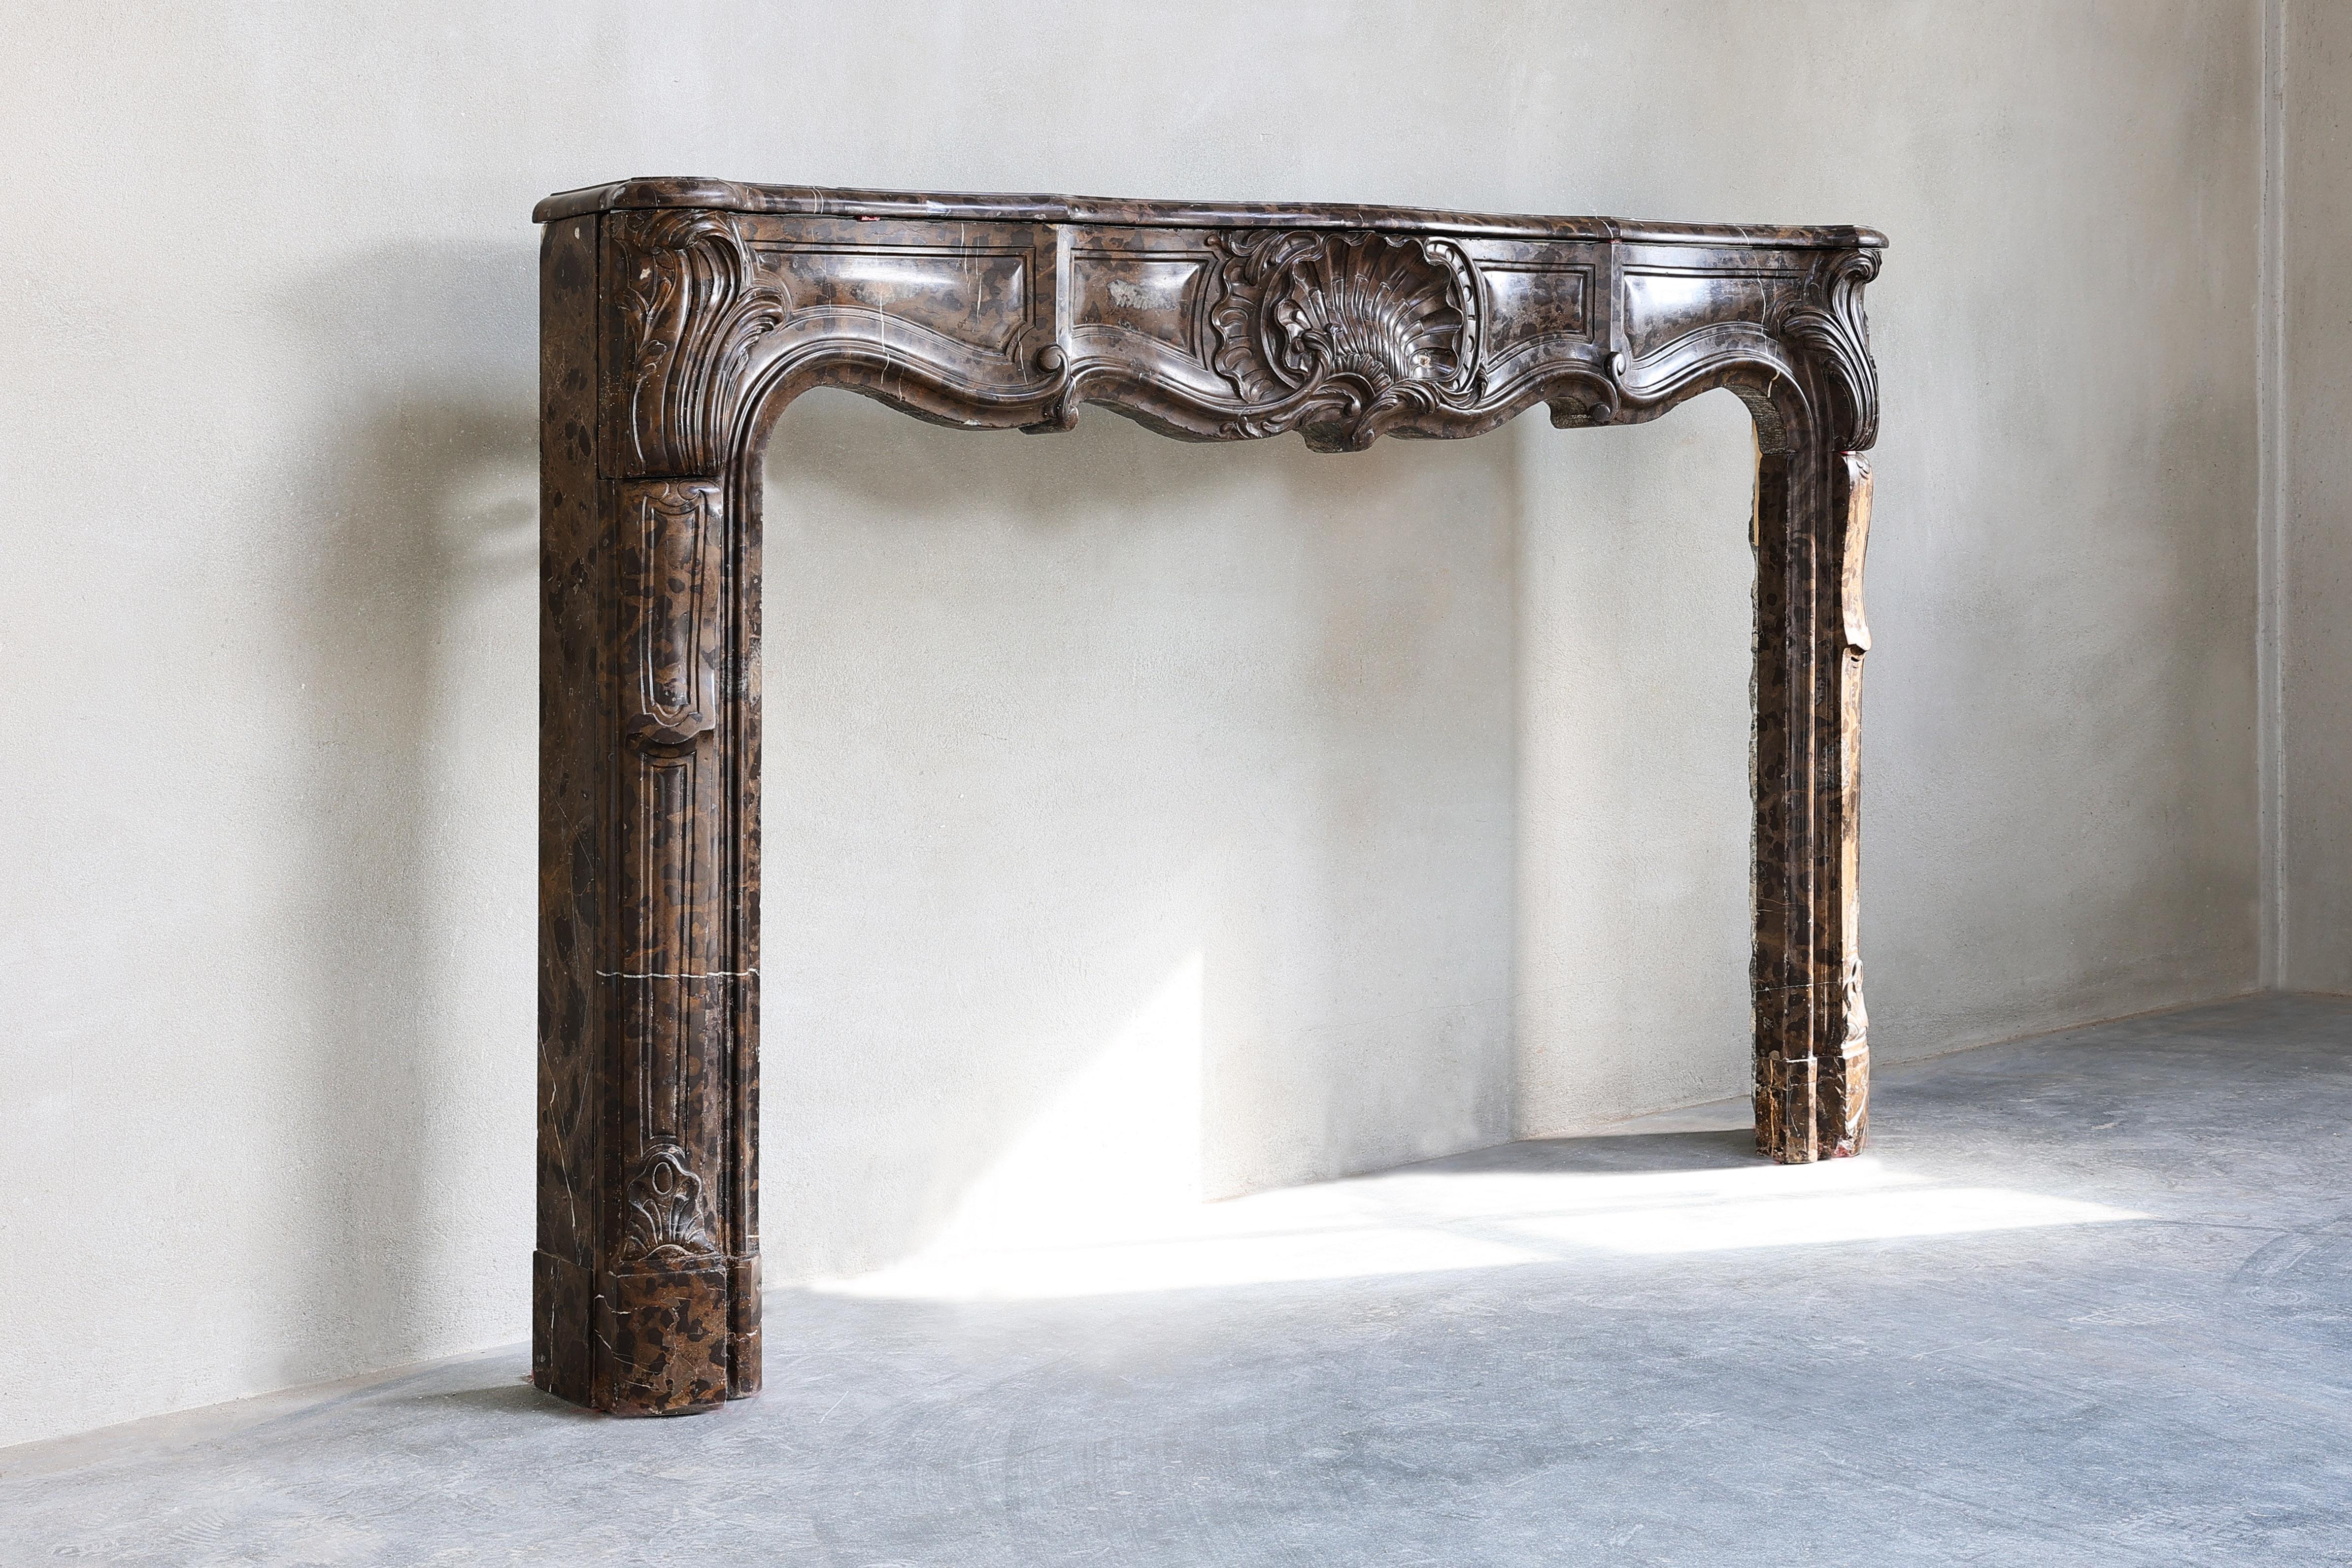 Beautiful 18th century fireplace in the style of Louis XV Rococo. This fireplace mantel has been sculptured in the warm French Stincal marble. This marble is also well known as 